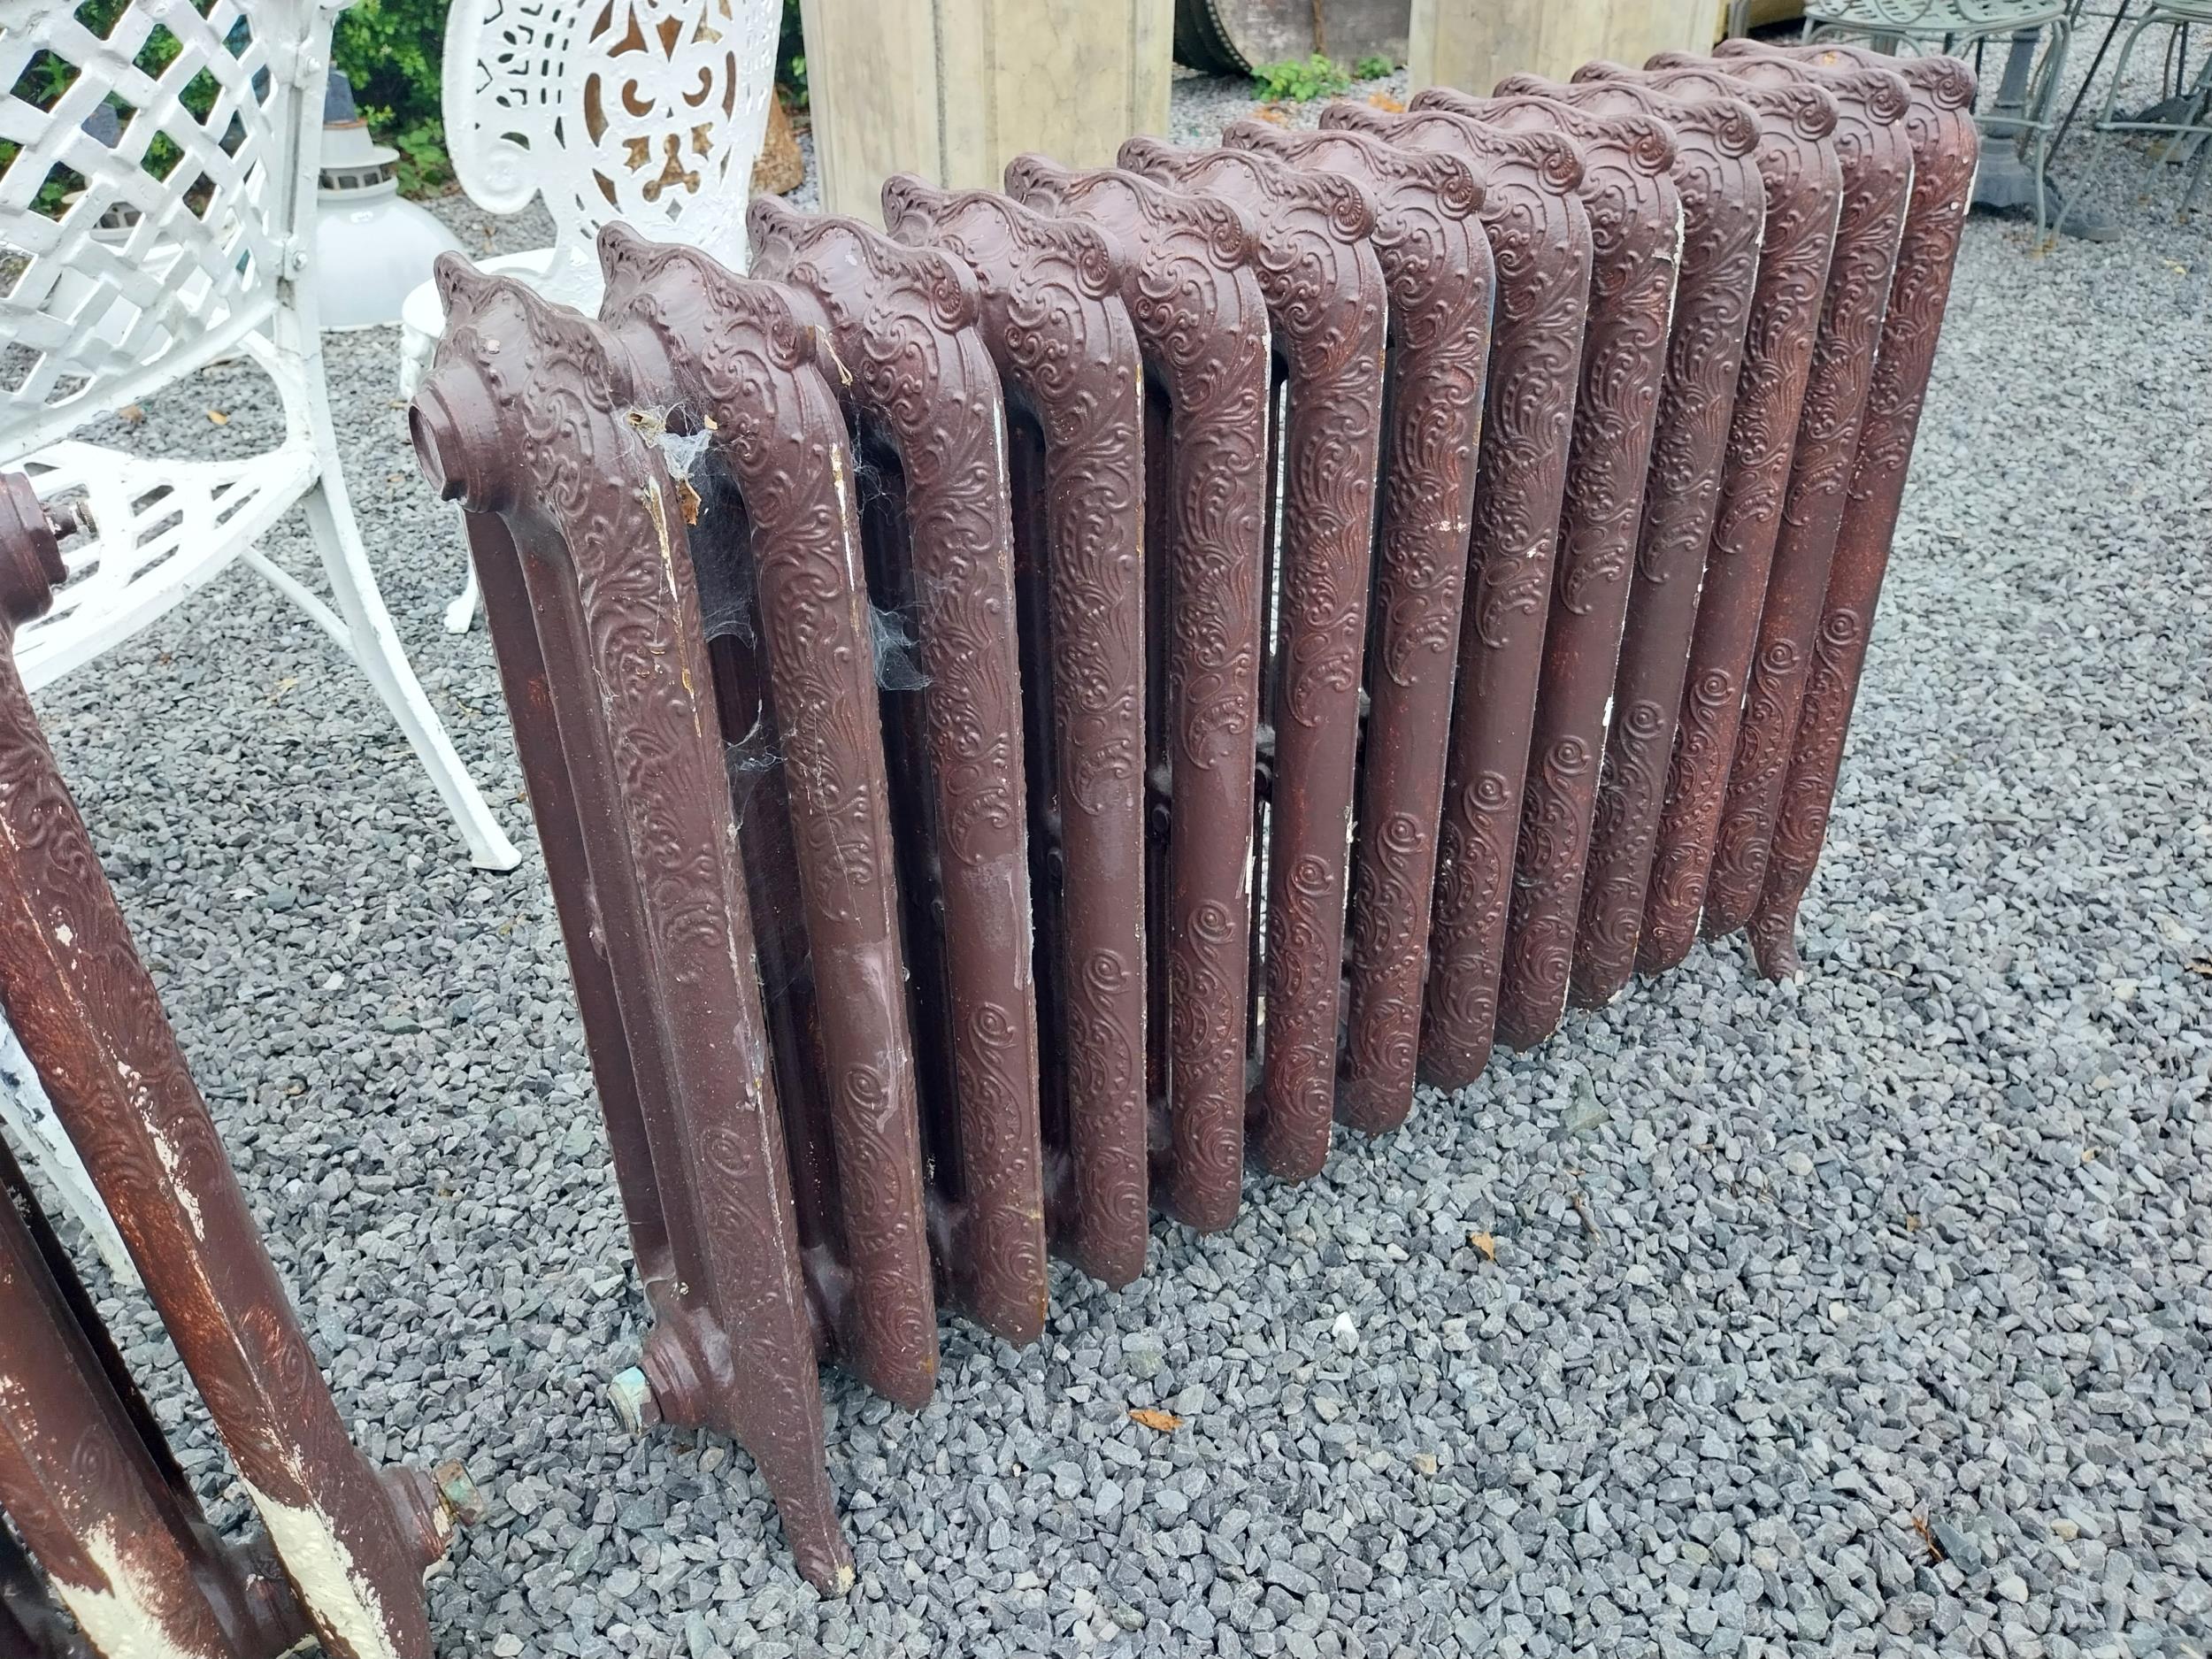 Two decorative cast iron radiators in the Victorian style - taken out working {74 cm H x 108 cm W - Image 2 of 2